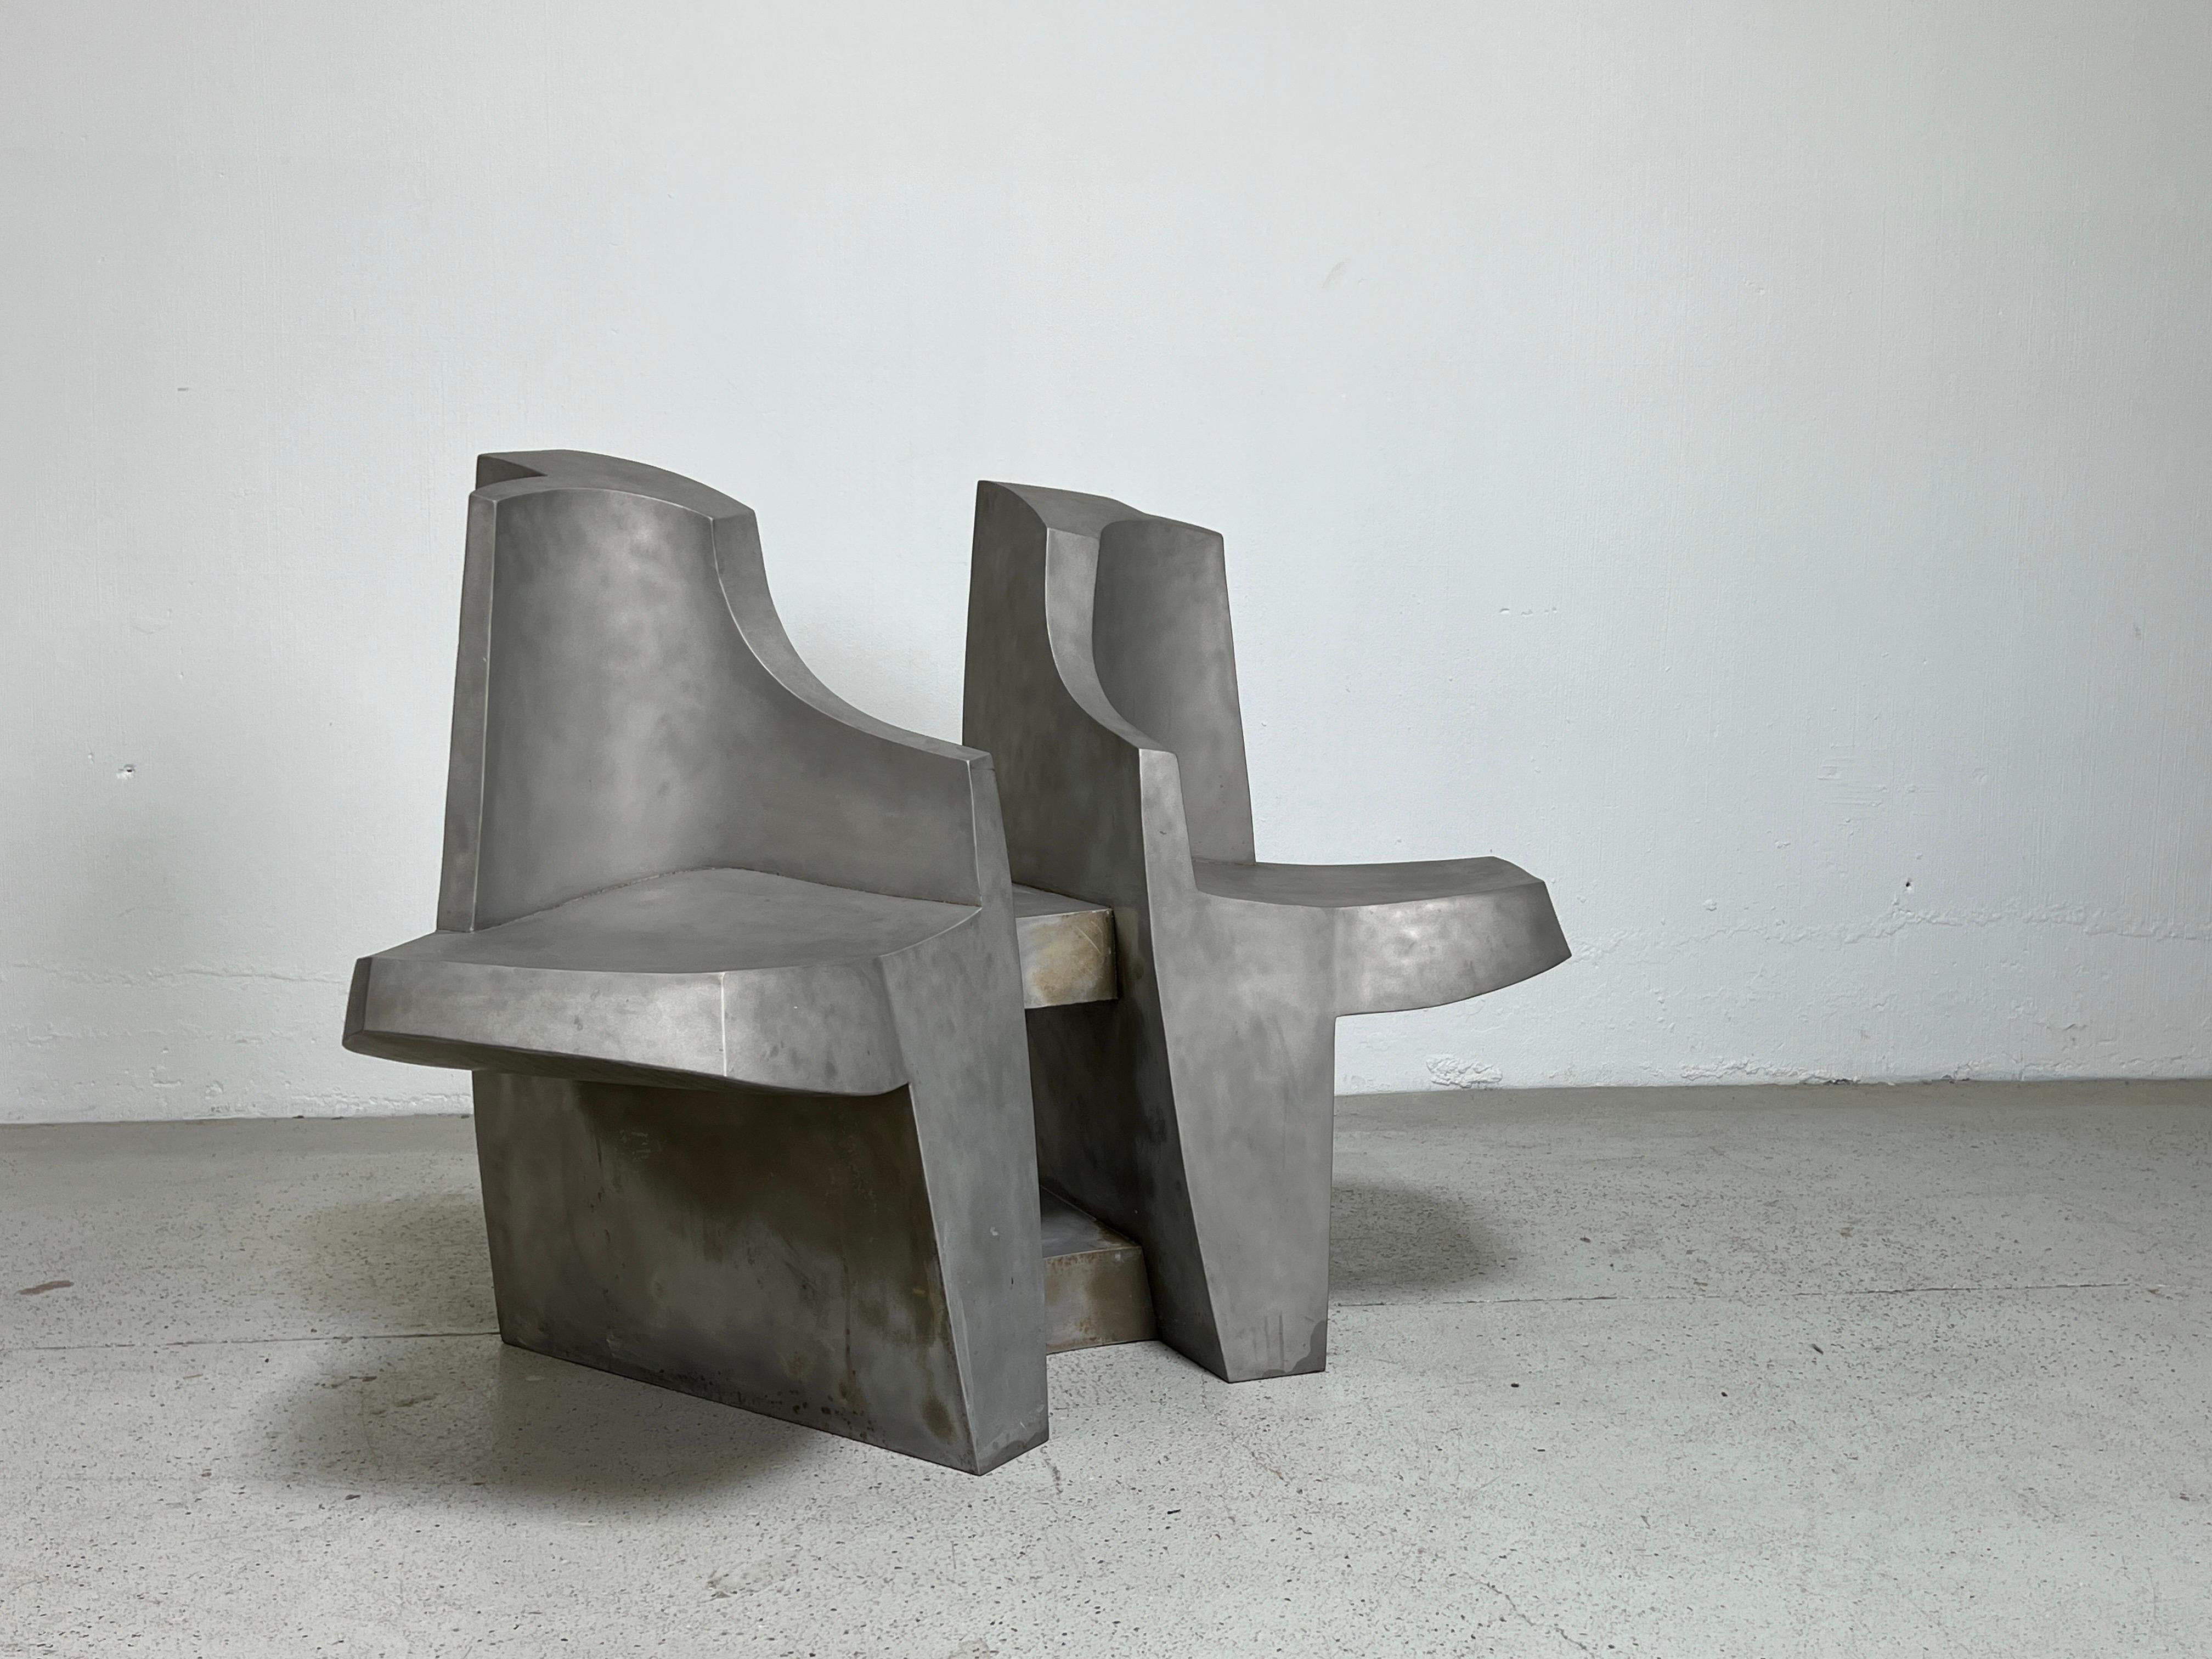 A sculptural aluminum bench made by artist Jim Cole and sold through Art et Industrie, c.1990. 